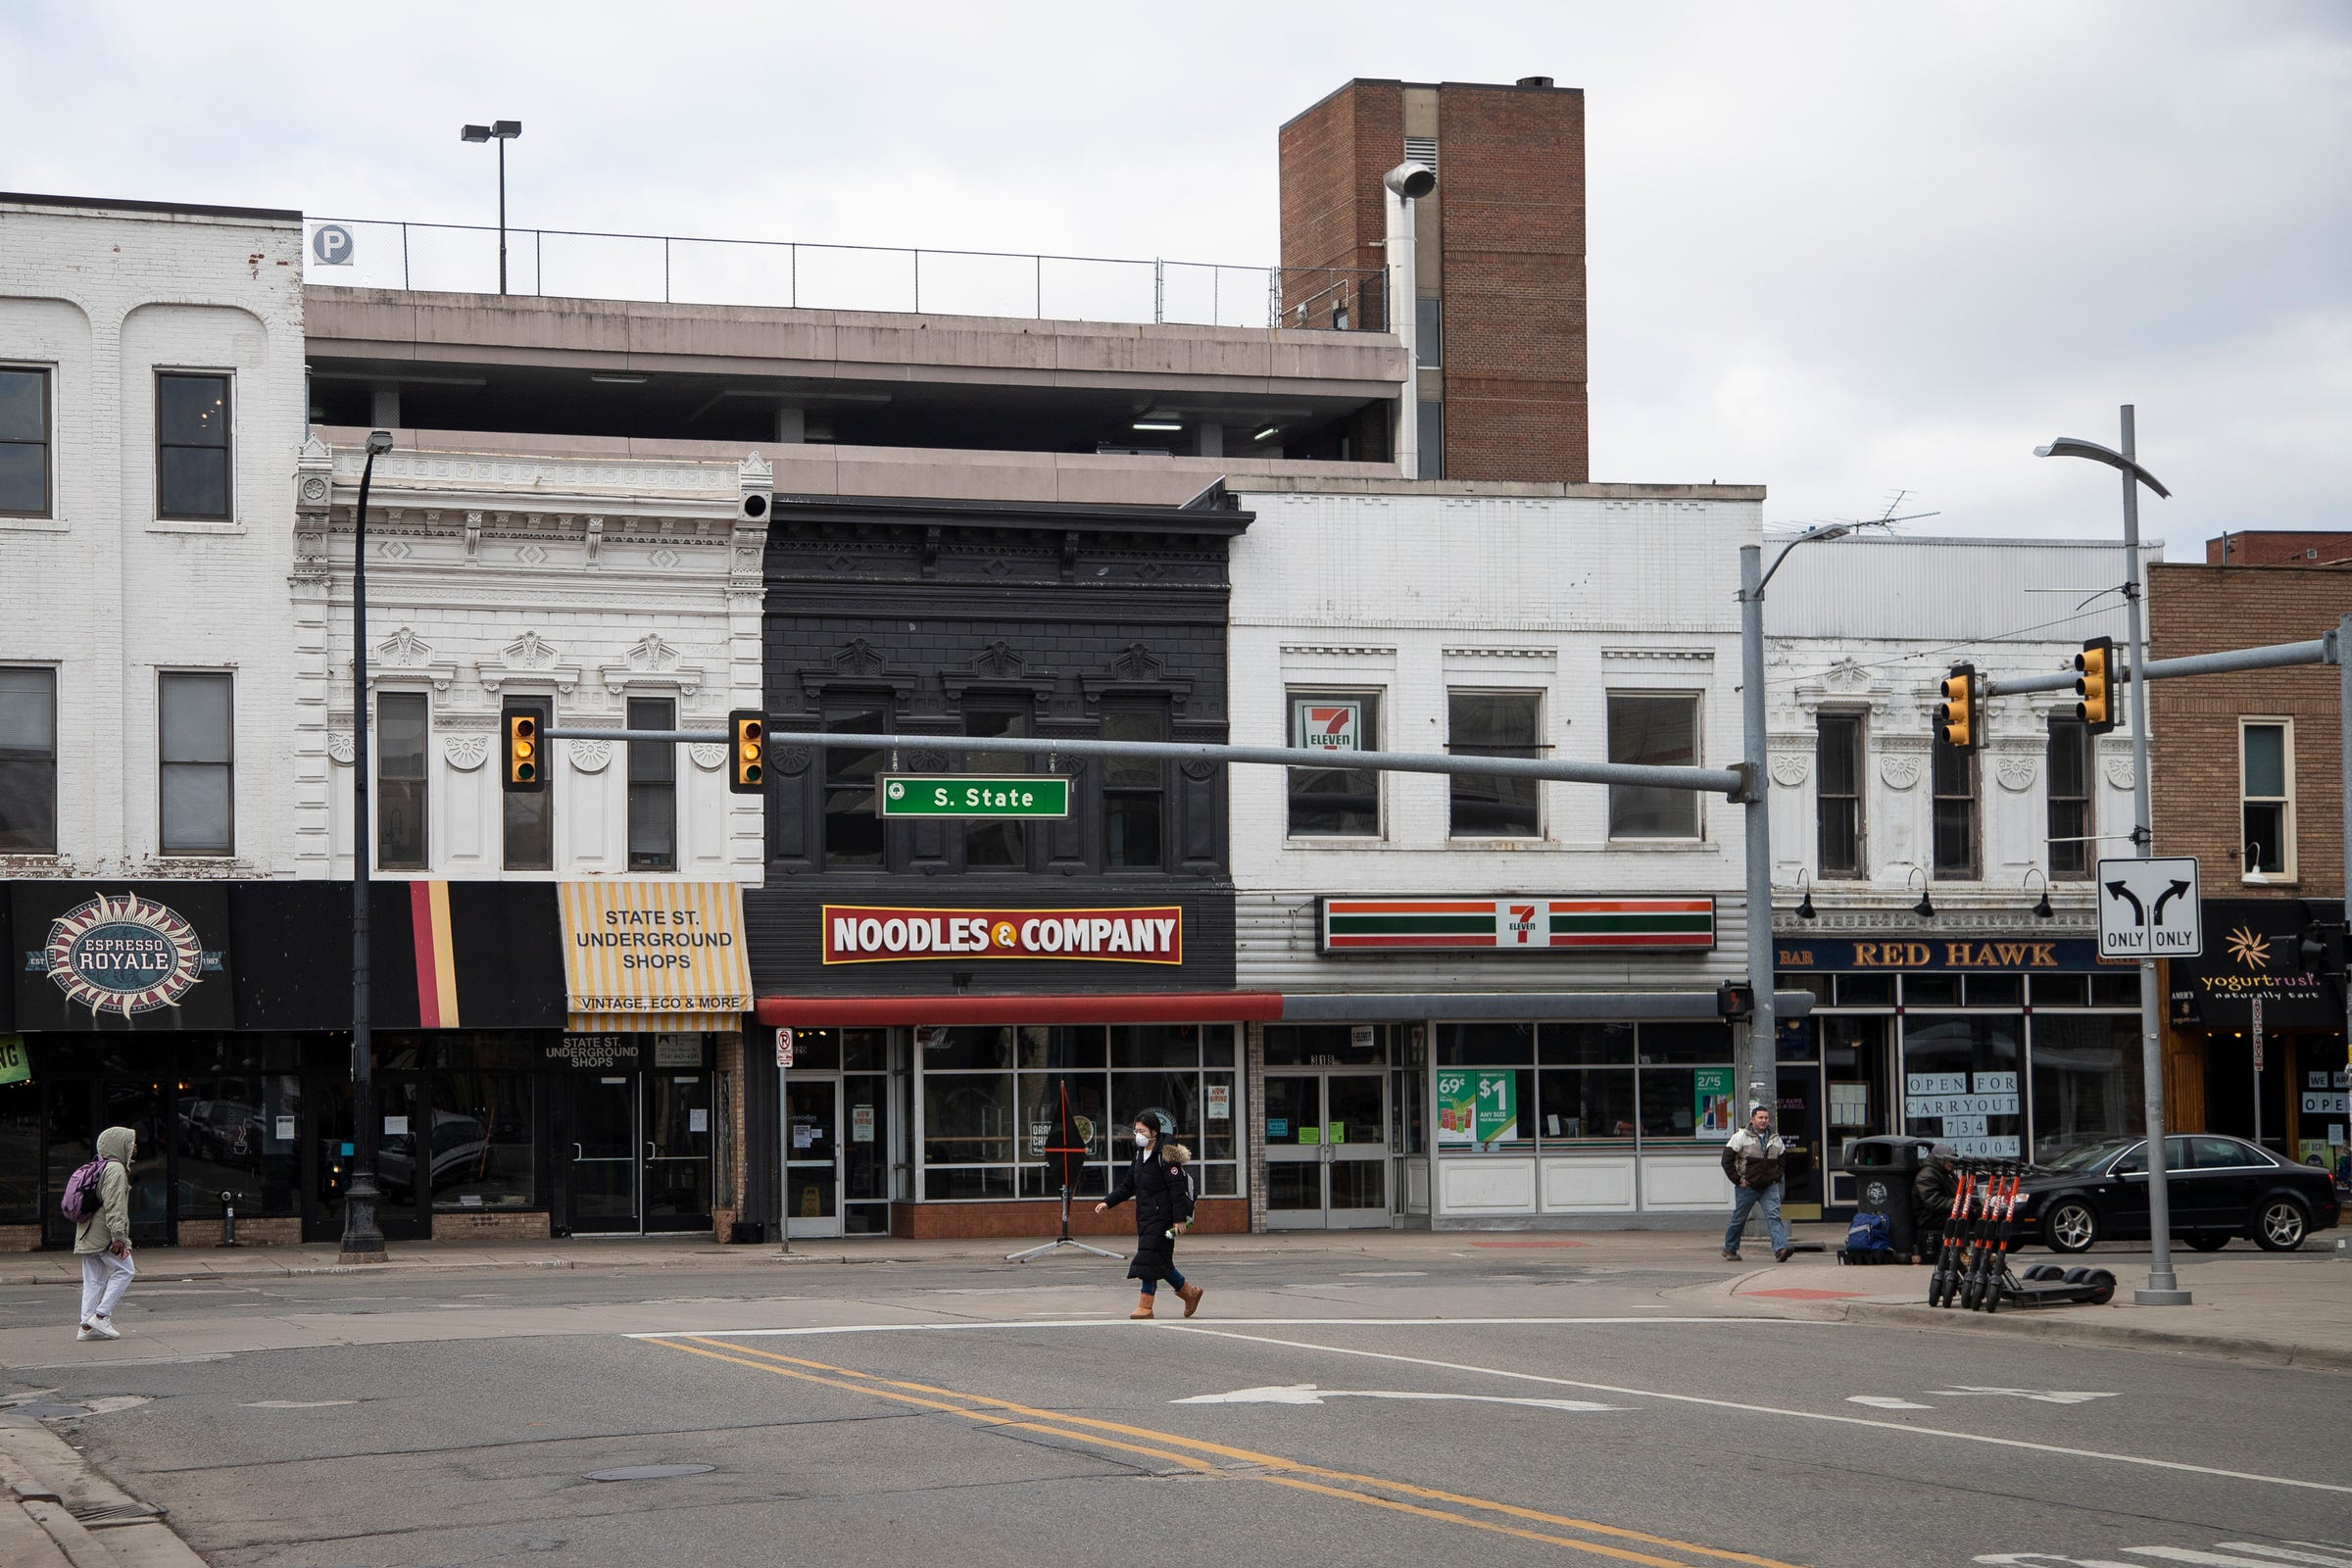 Intersections of South State Street and North University Avenue on University of Michigan main campus in Ann Arbor, Tuesday, March 17, 2020.

